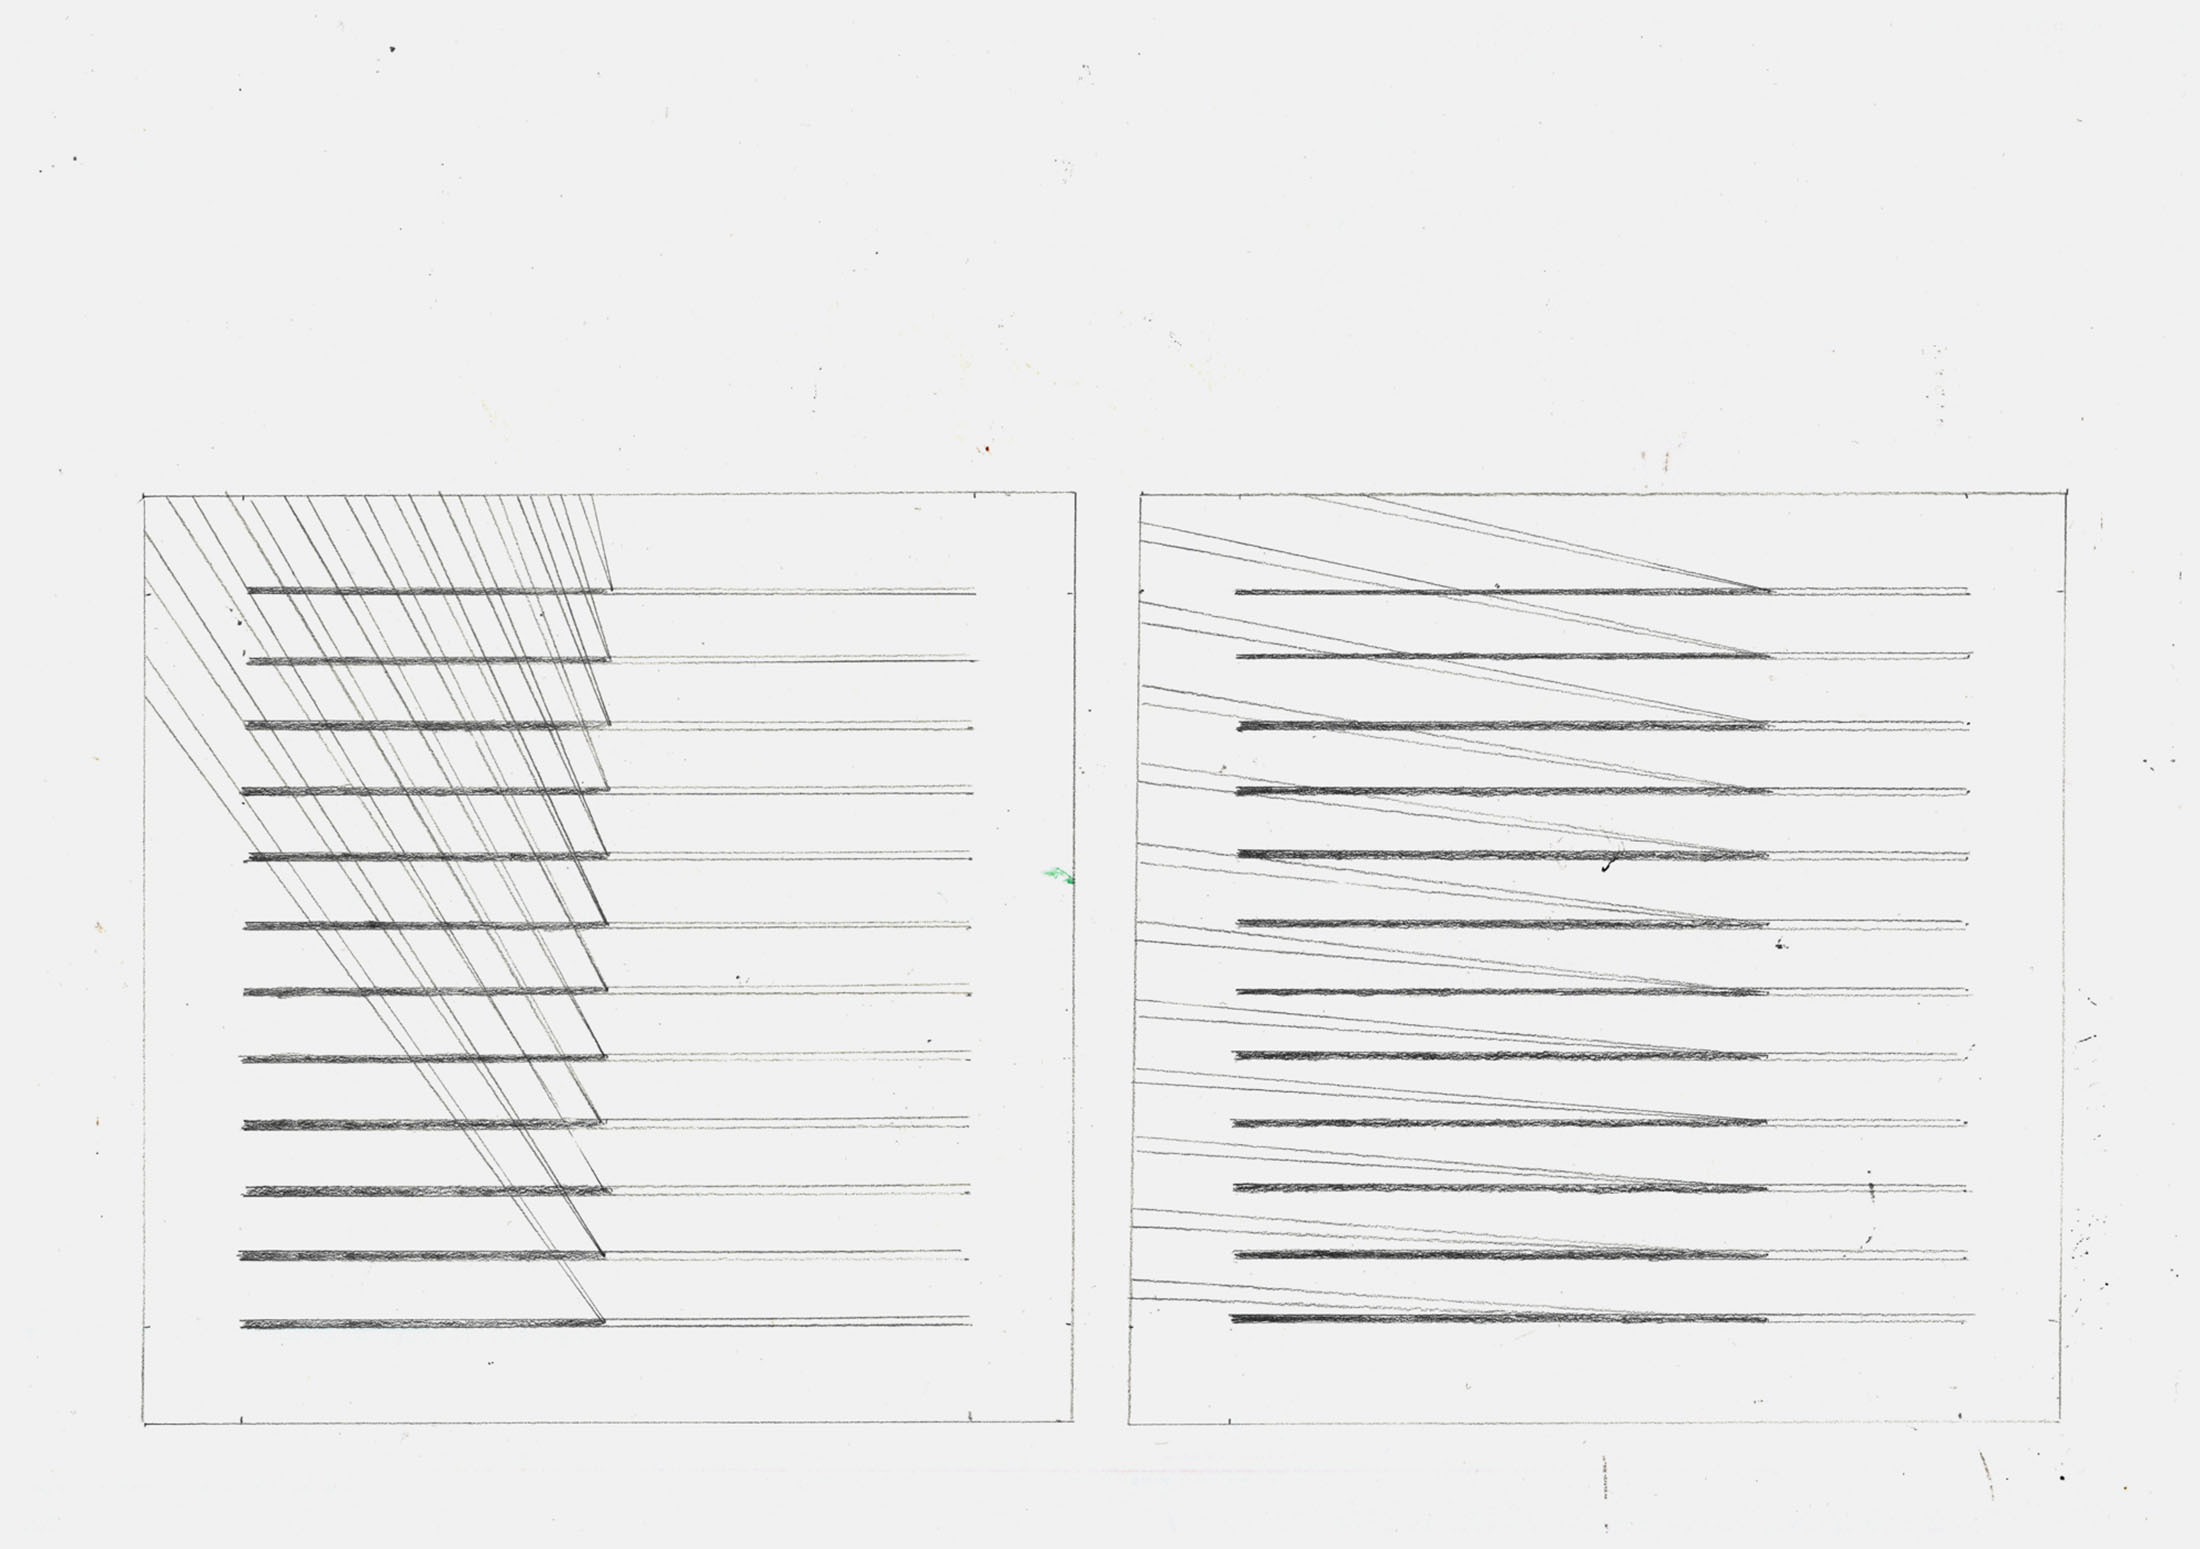 Photo of a graphite drawing on paper inspired by needles and ladders